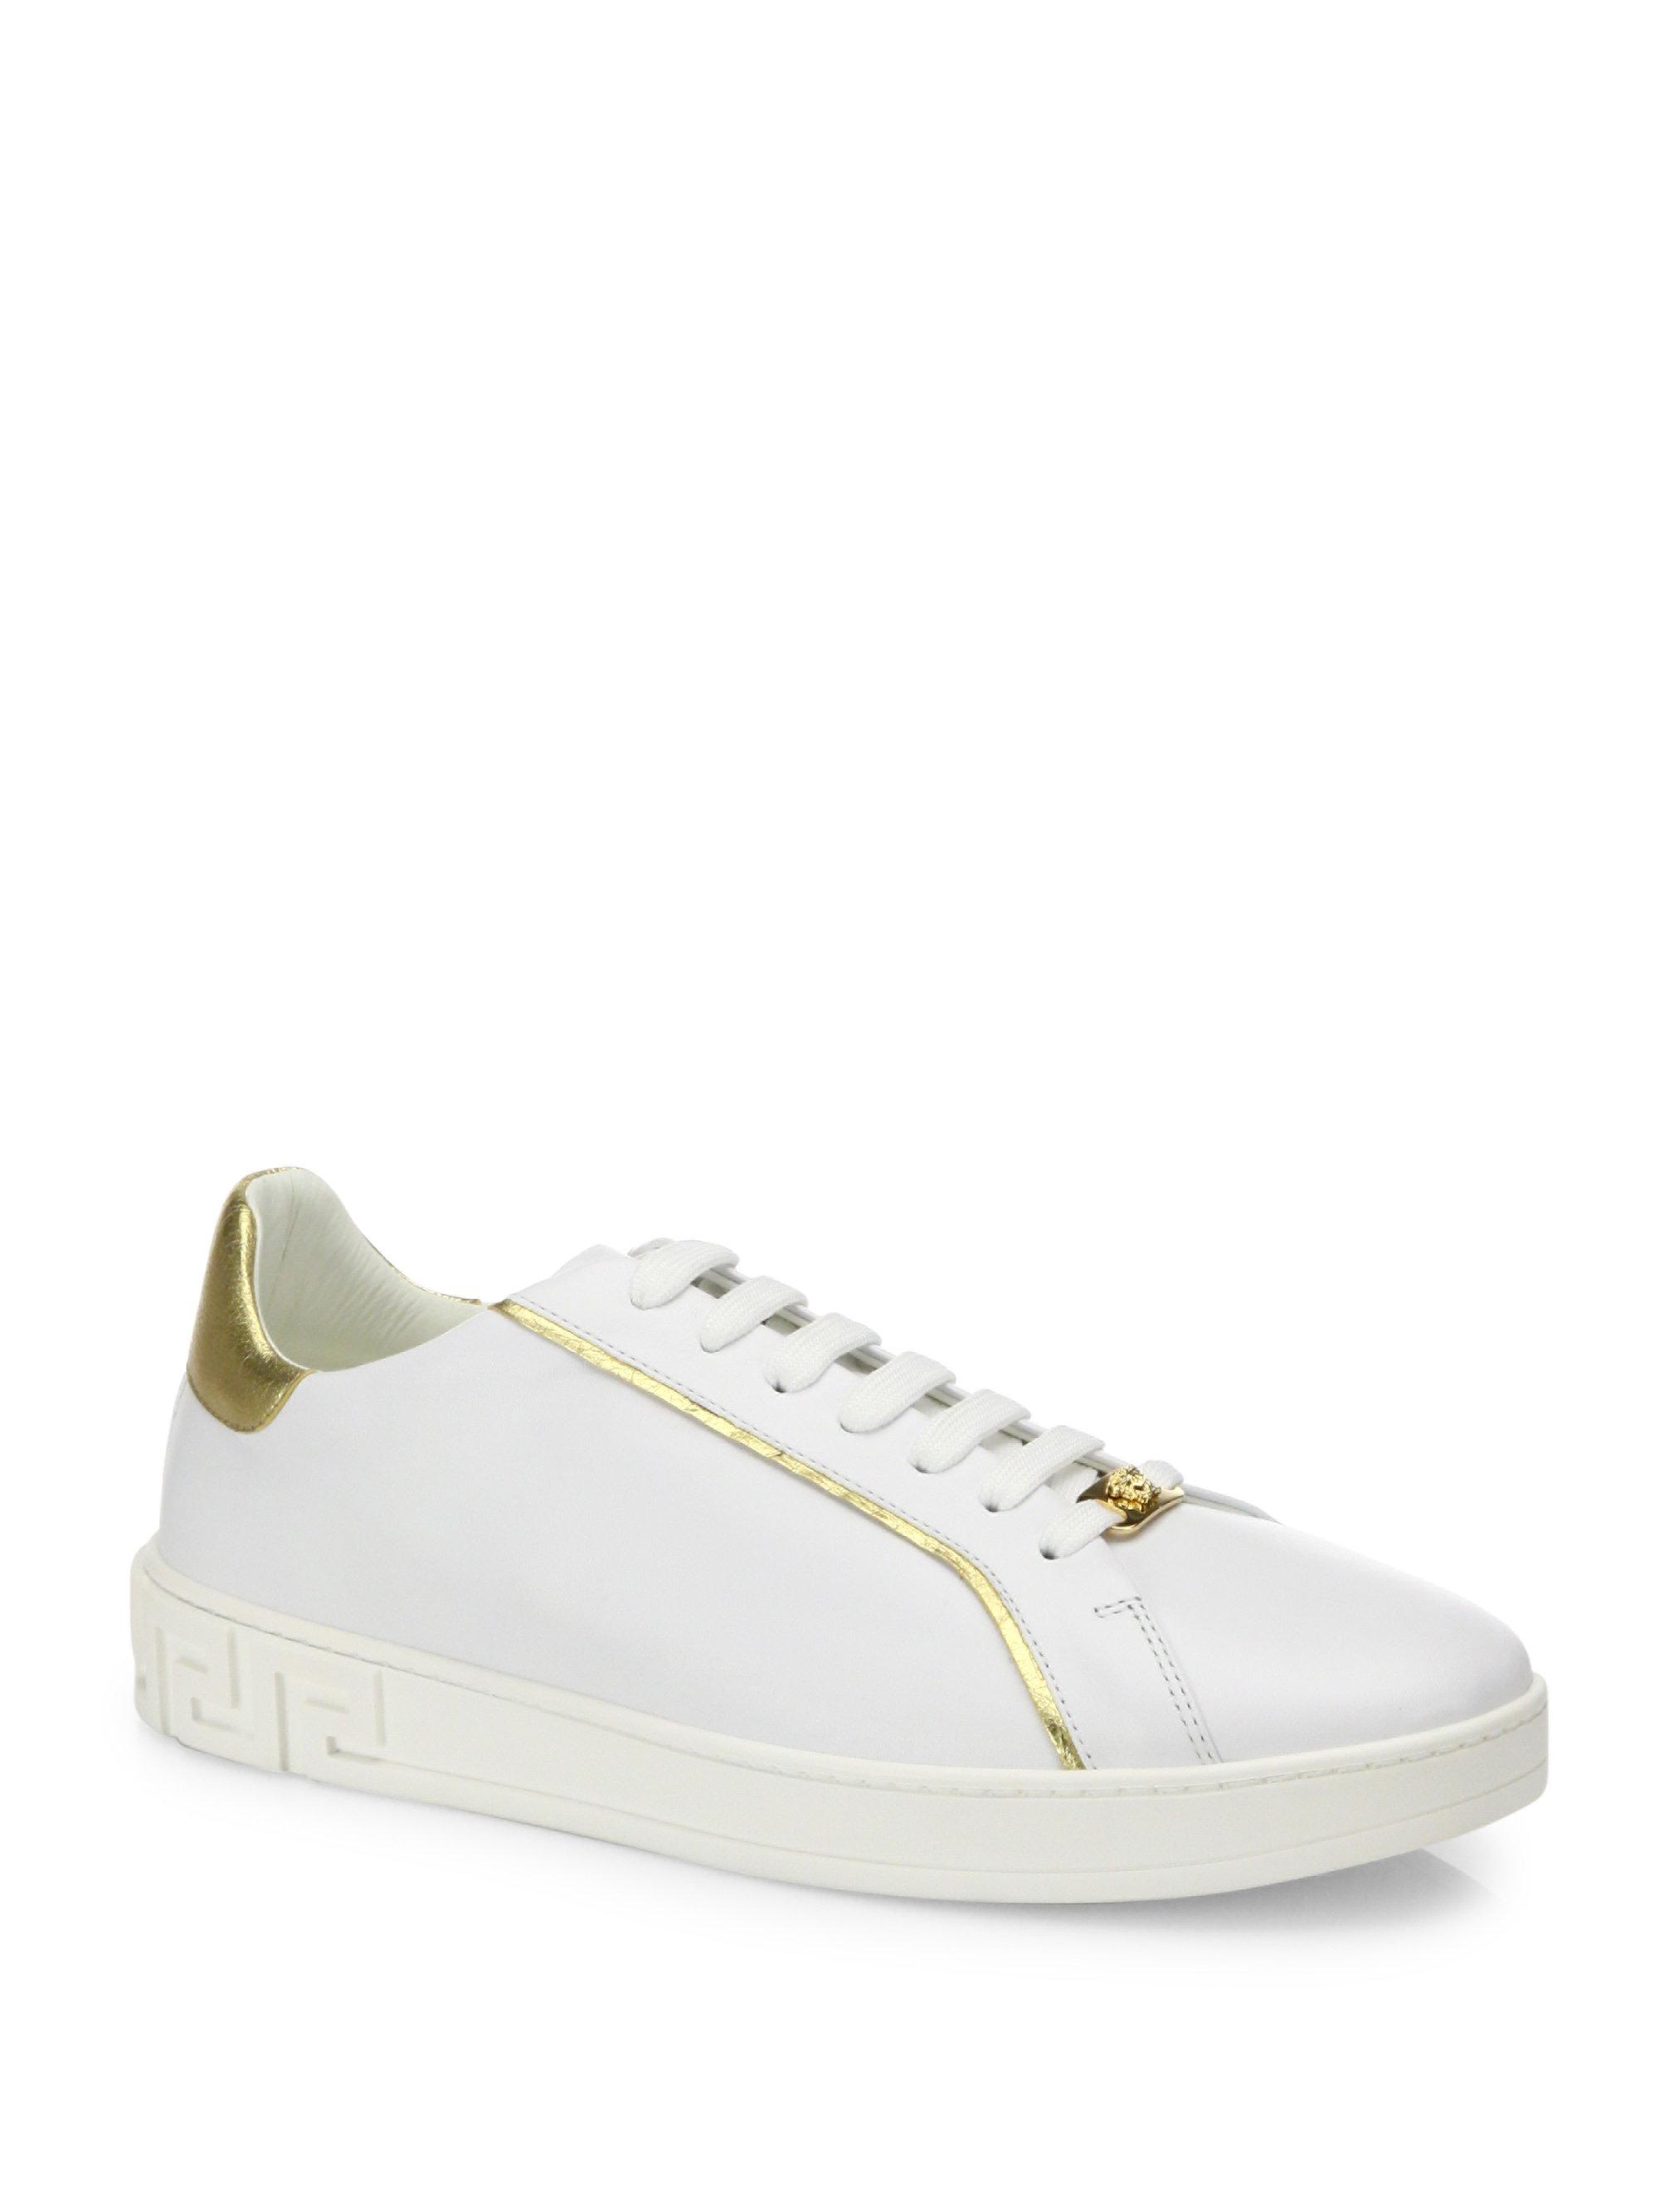 Versace Grecco Signature Accented Leather Low-top Sneakers in White ...